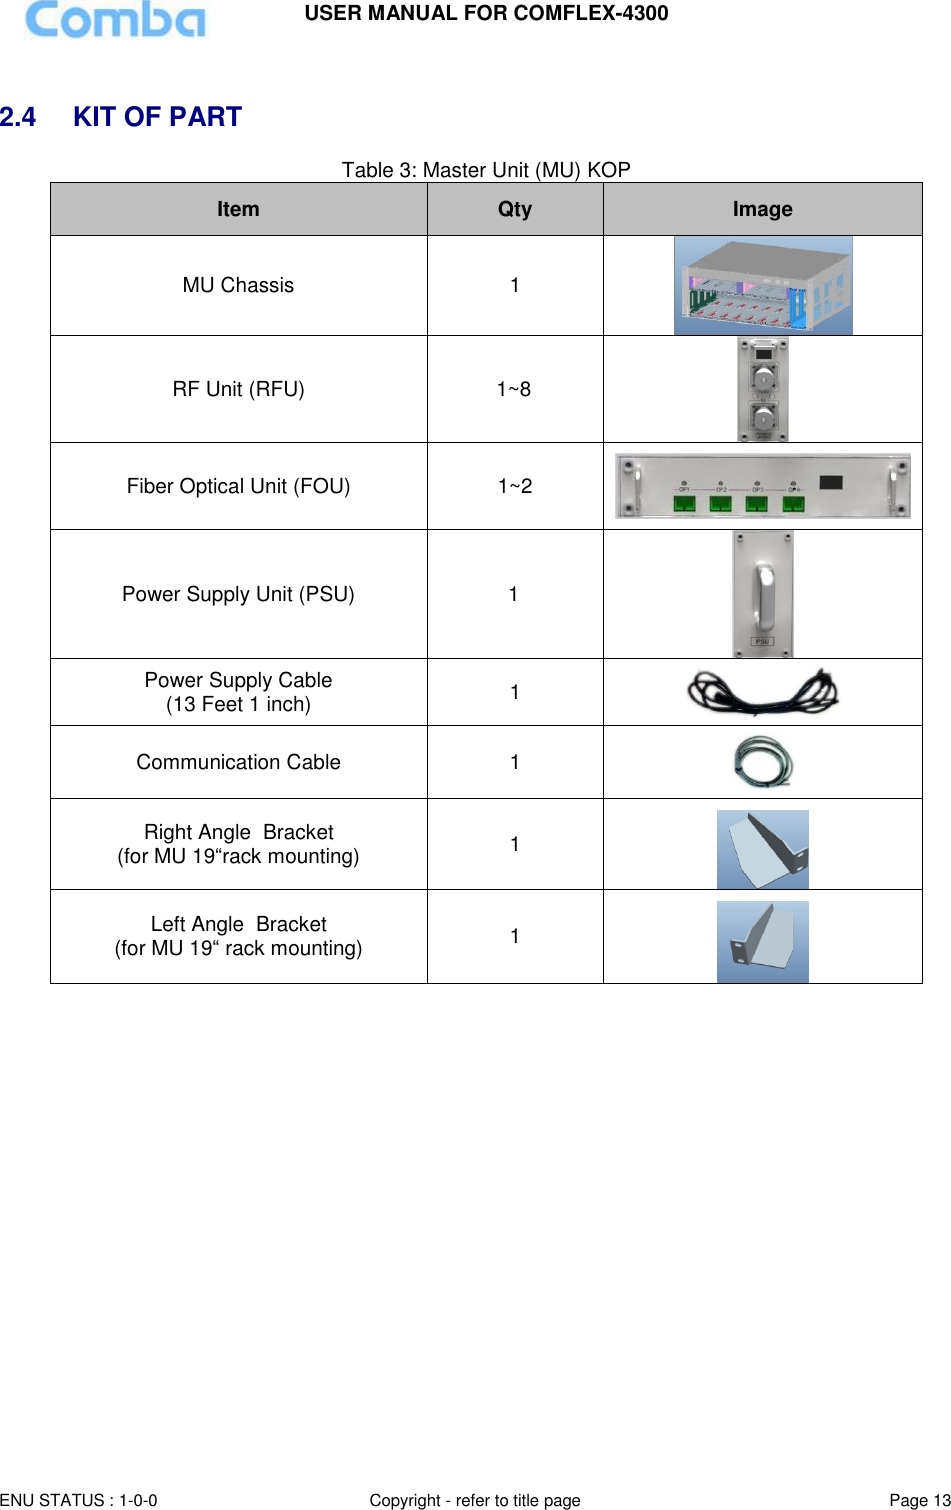 USER MANUAL FOR COMFLEX-4300 ENU STATUS : 1-0-0 Copyright - refer to title page Page 13   2.4 KIT OF PART Table 3: Master Unit (MU) KOP Item Qty Image MU Chassis 1  RF Unit (RFU) 1~8  Fiber Optical Unit (FOU) 1~2  Power Supply Unit (PSU) 1  Power Supply Cable (13 Feet 1 inch) 1  Communication Cable 1  Right Angle  Bracket (for MU 19“rack mounting) 1   Left Angle  Bracket (for MU 19“ rack mounting) 1    